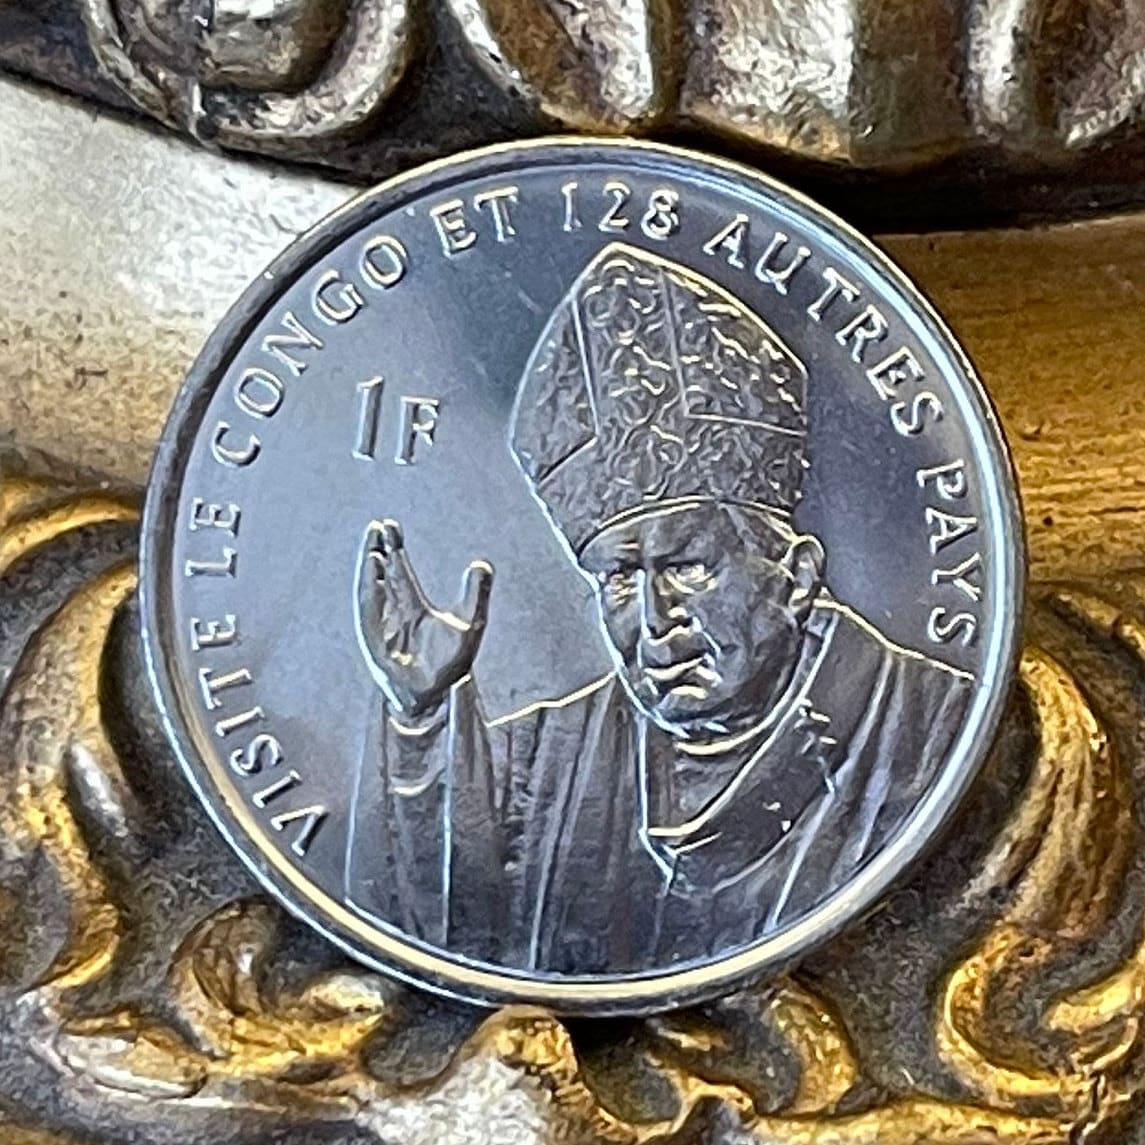 Saint John Paul II & Lion Congo 1 Franc Authentic Coin Money for Jewelry and Craft Making (Zaire) (Pope John Paul II) (2004)